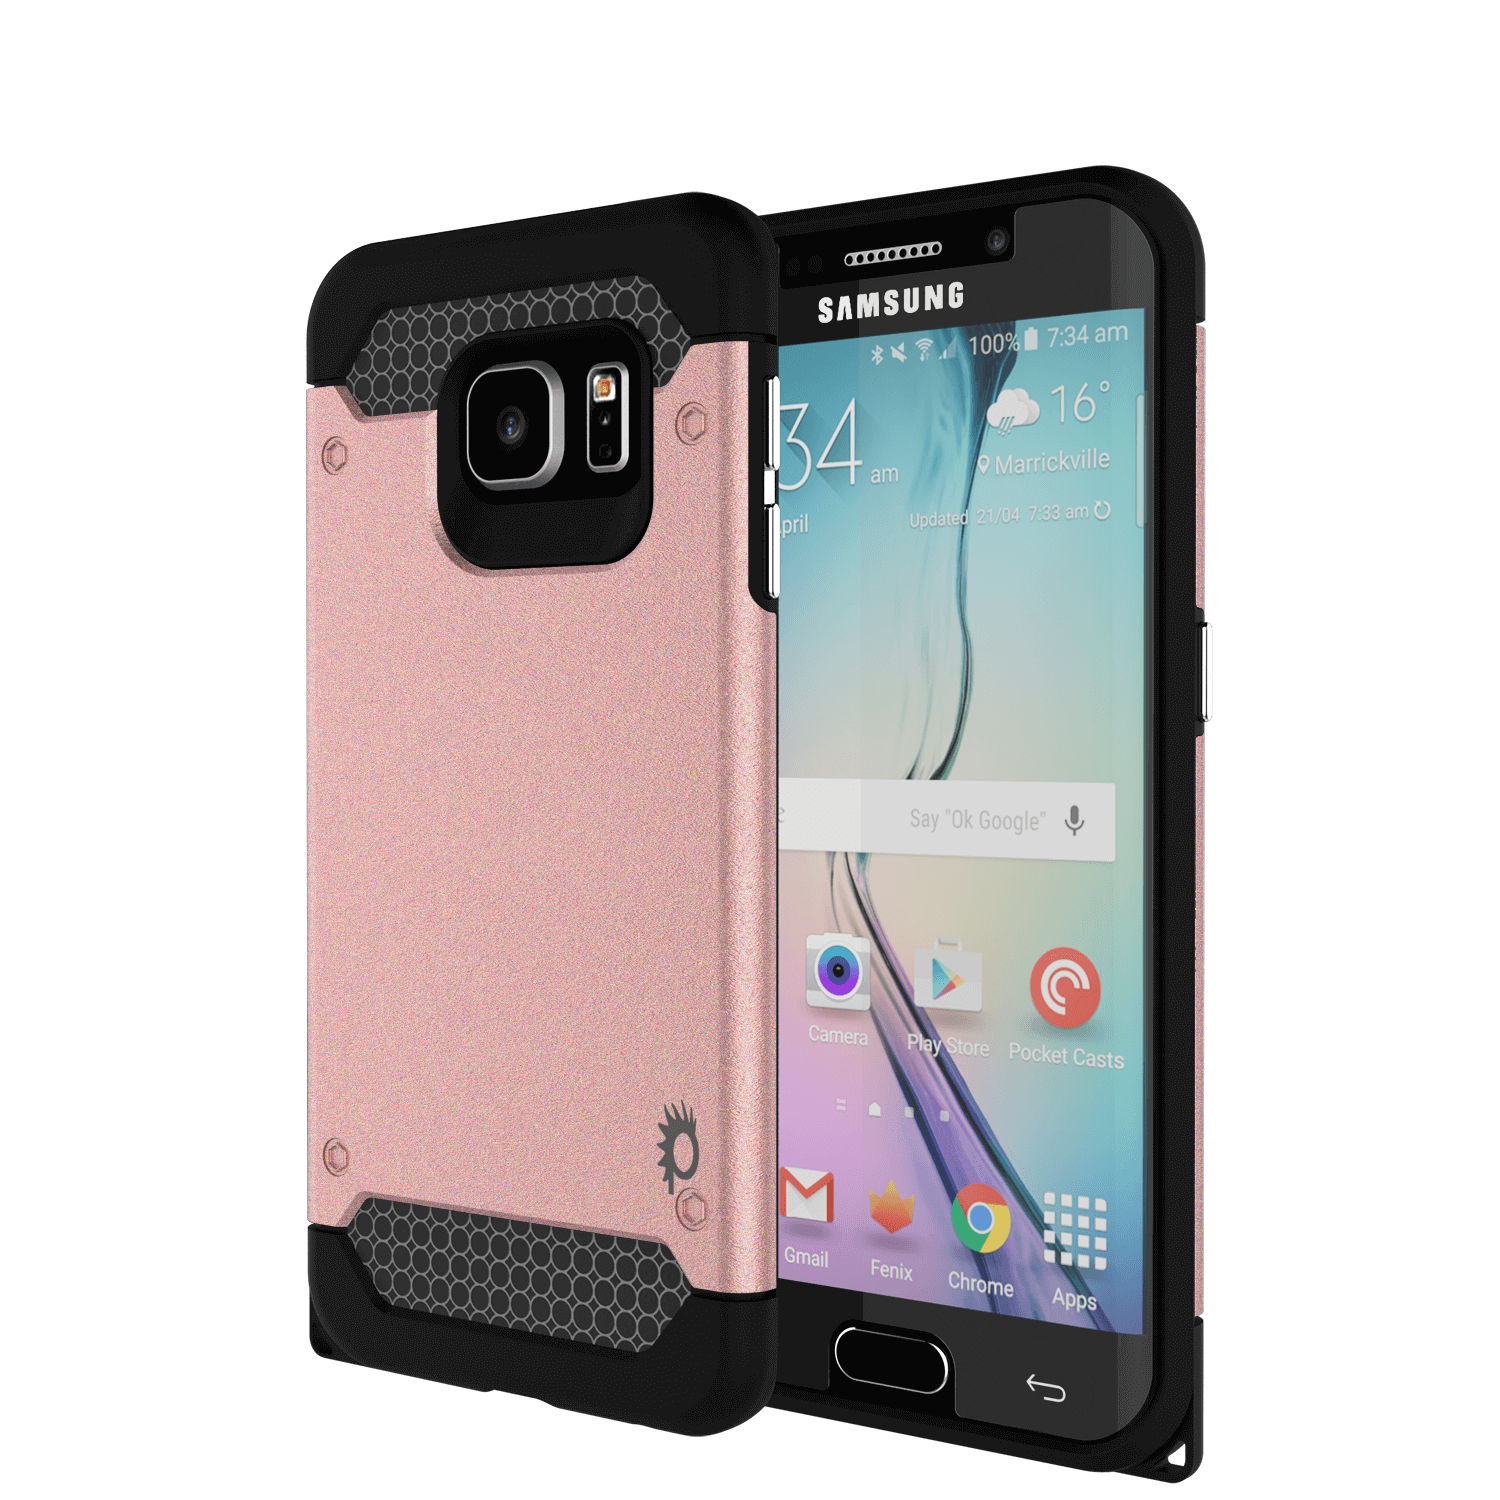 Galaxy s6 EDGE Case PunkCase Galactic Rose Gold Series Slim Armor Soft Cover w/ Screen Protector